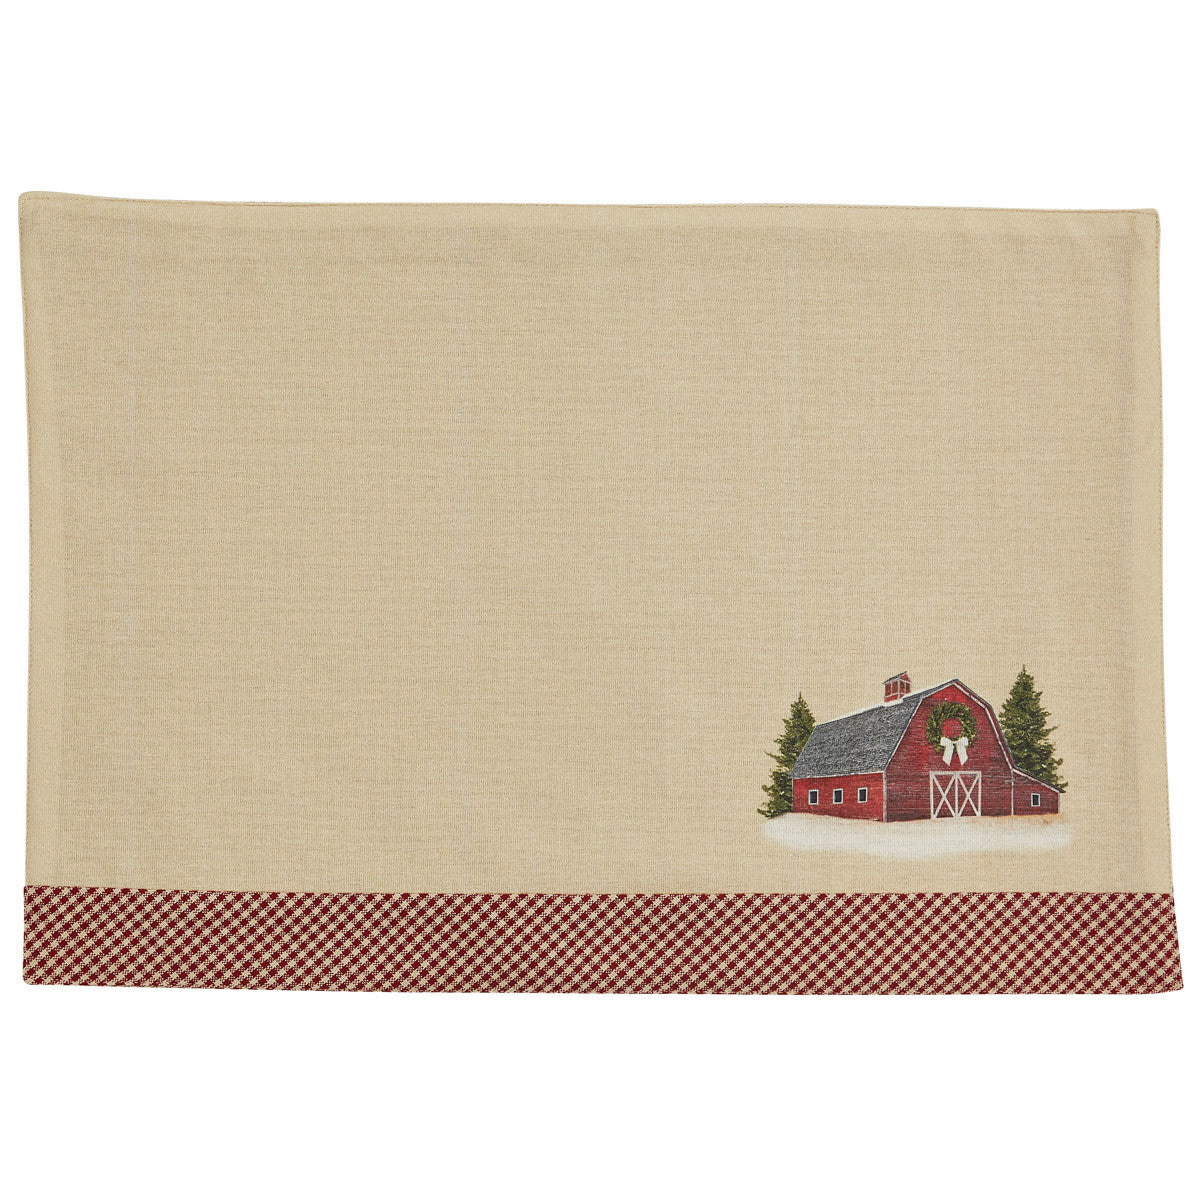 Barn Greetings Placemats - Set of 4 Park Designs